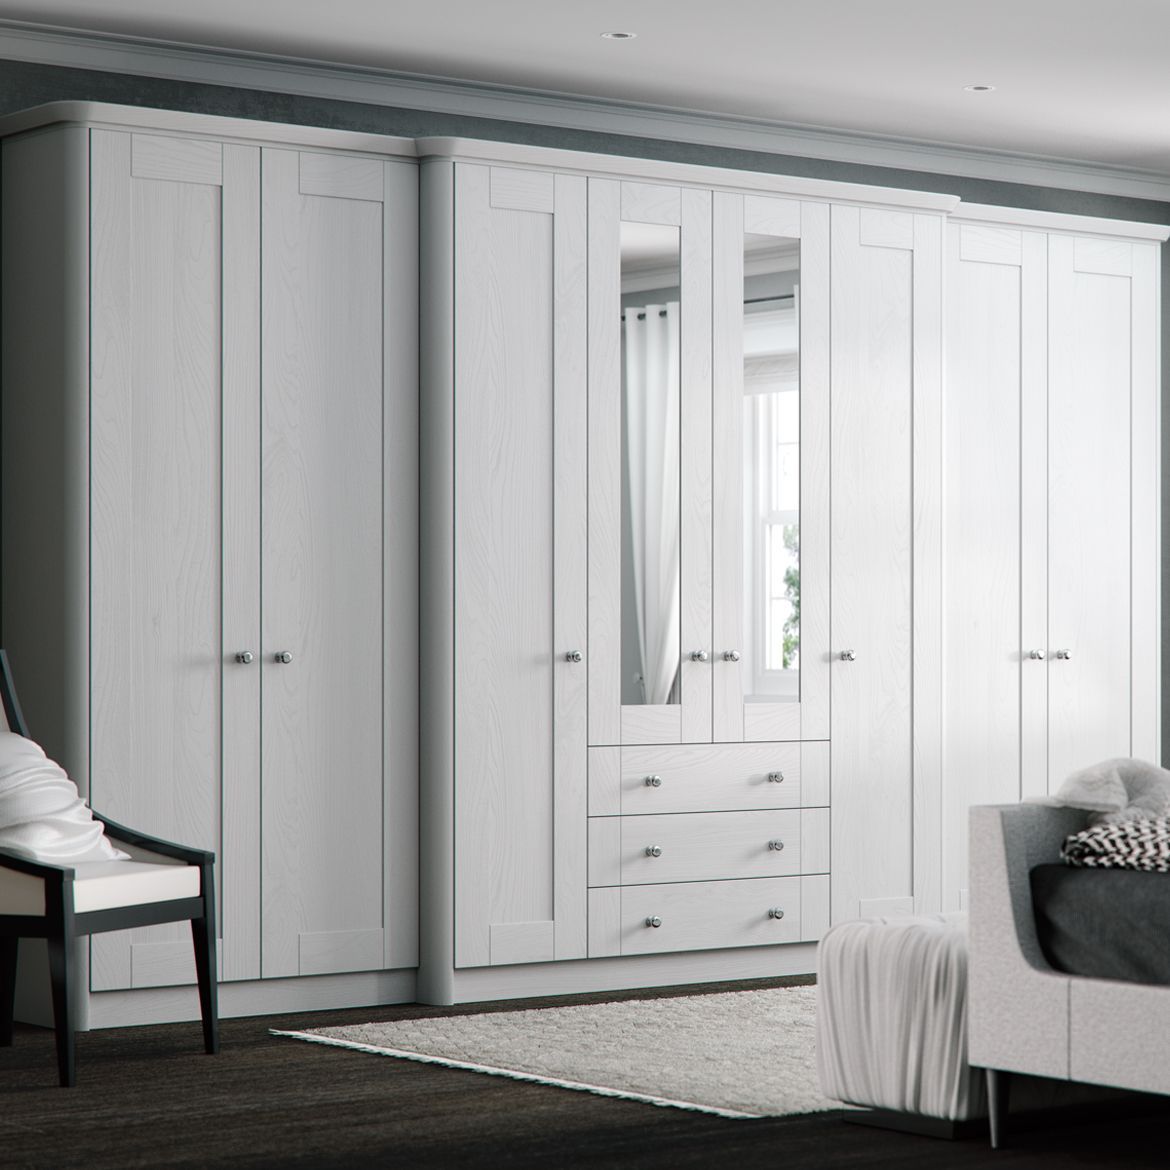 Aylesbury Wardrobe – Ivory | Cash & Carry Kitchens Intended For Ivory Wardrobes (View 3 of 15)